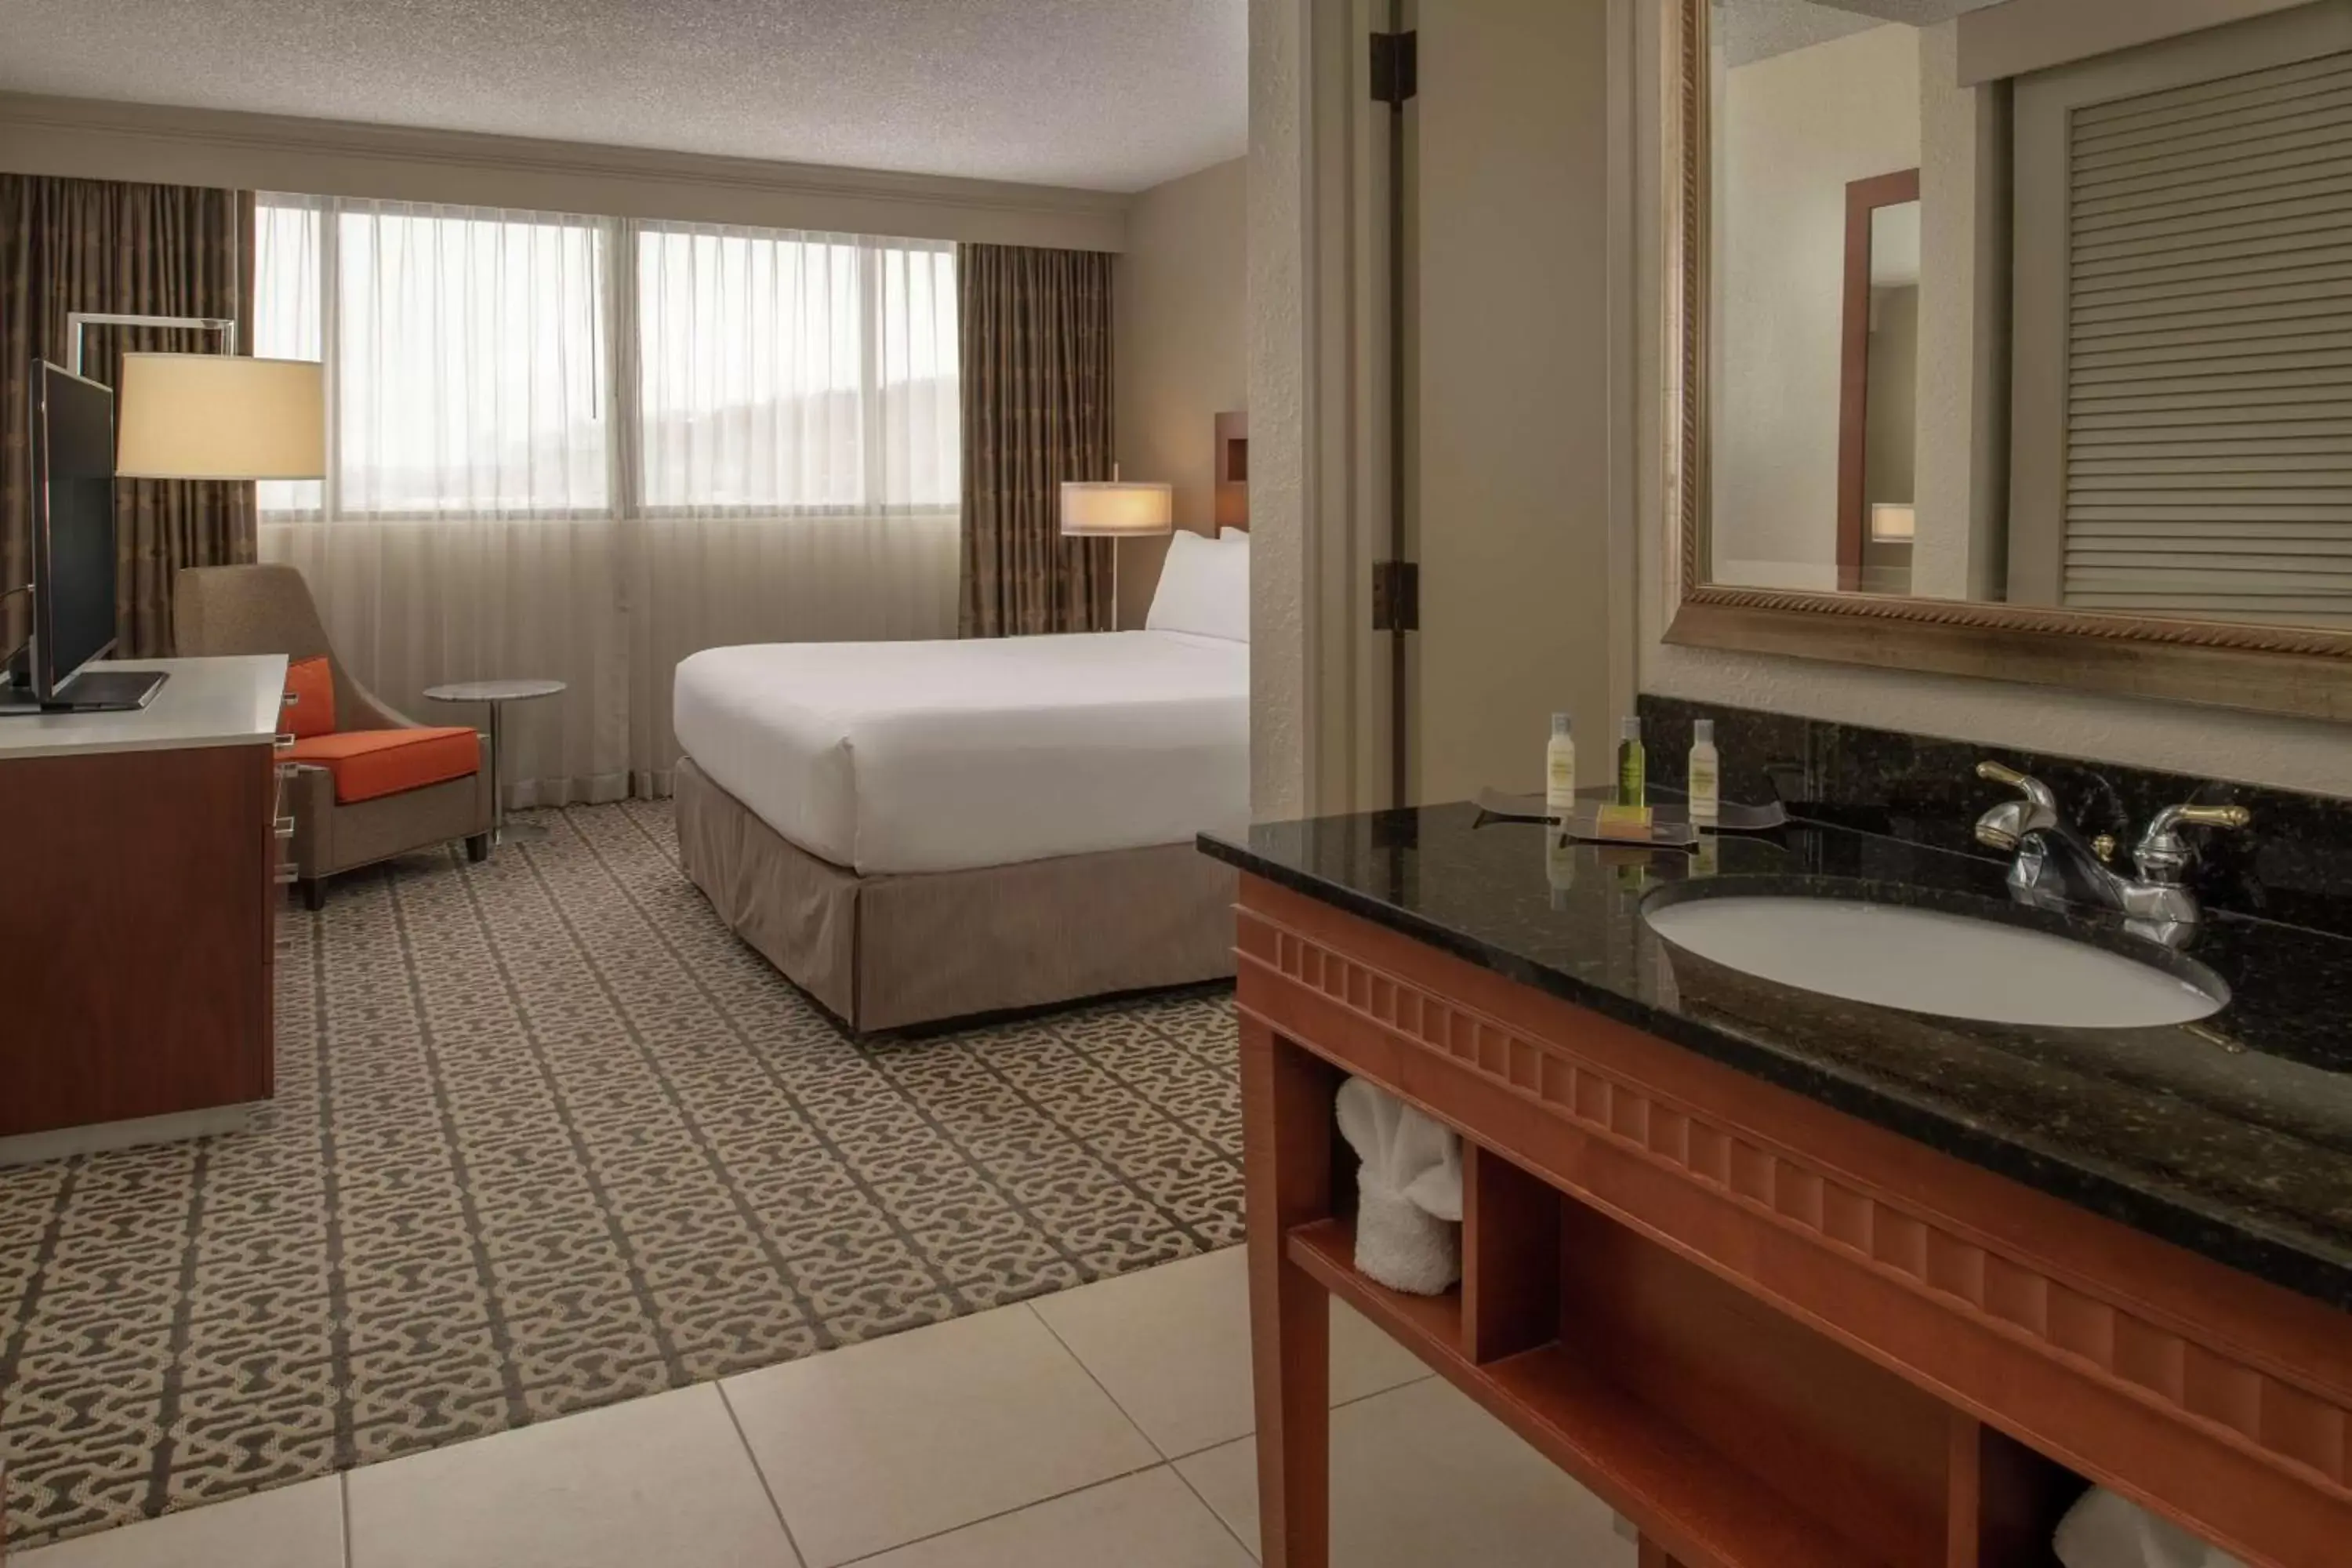 Bedroom, Bathroom in DoubleTree Suites by Hilton Seattle Airport/Southcenter